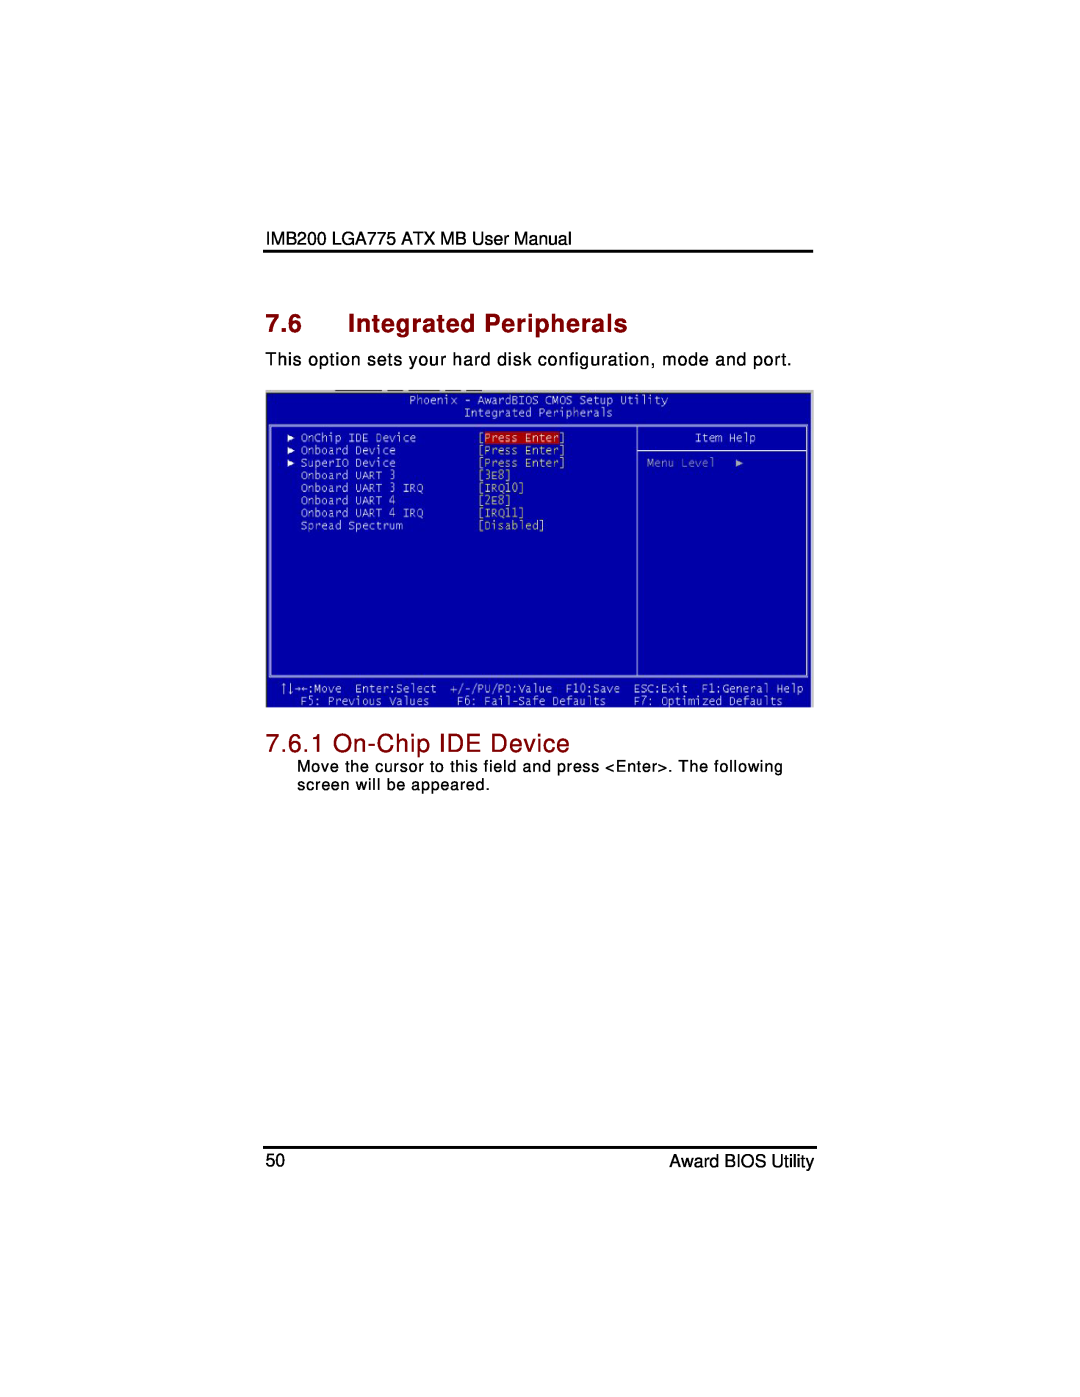 Intel IMB200VGE user manual Integrated Peripherals, On-Chip IDE Device 